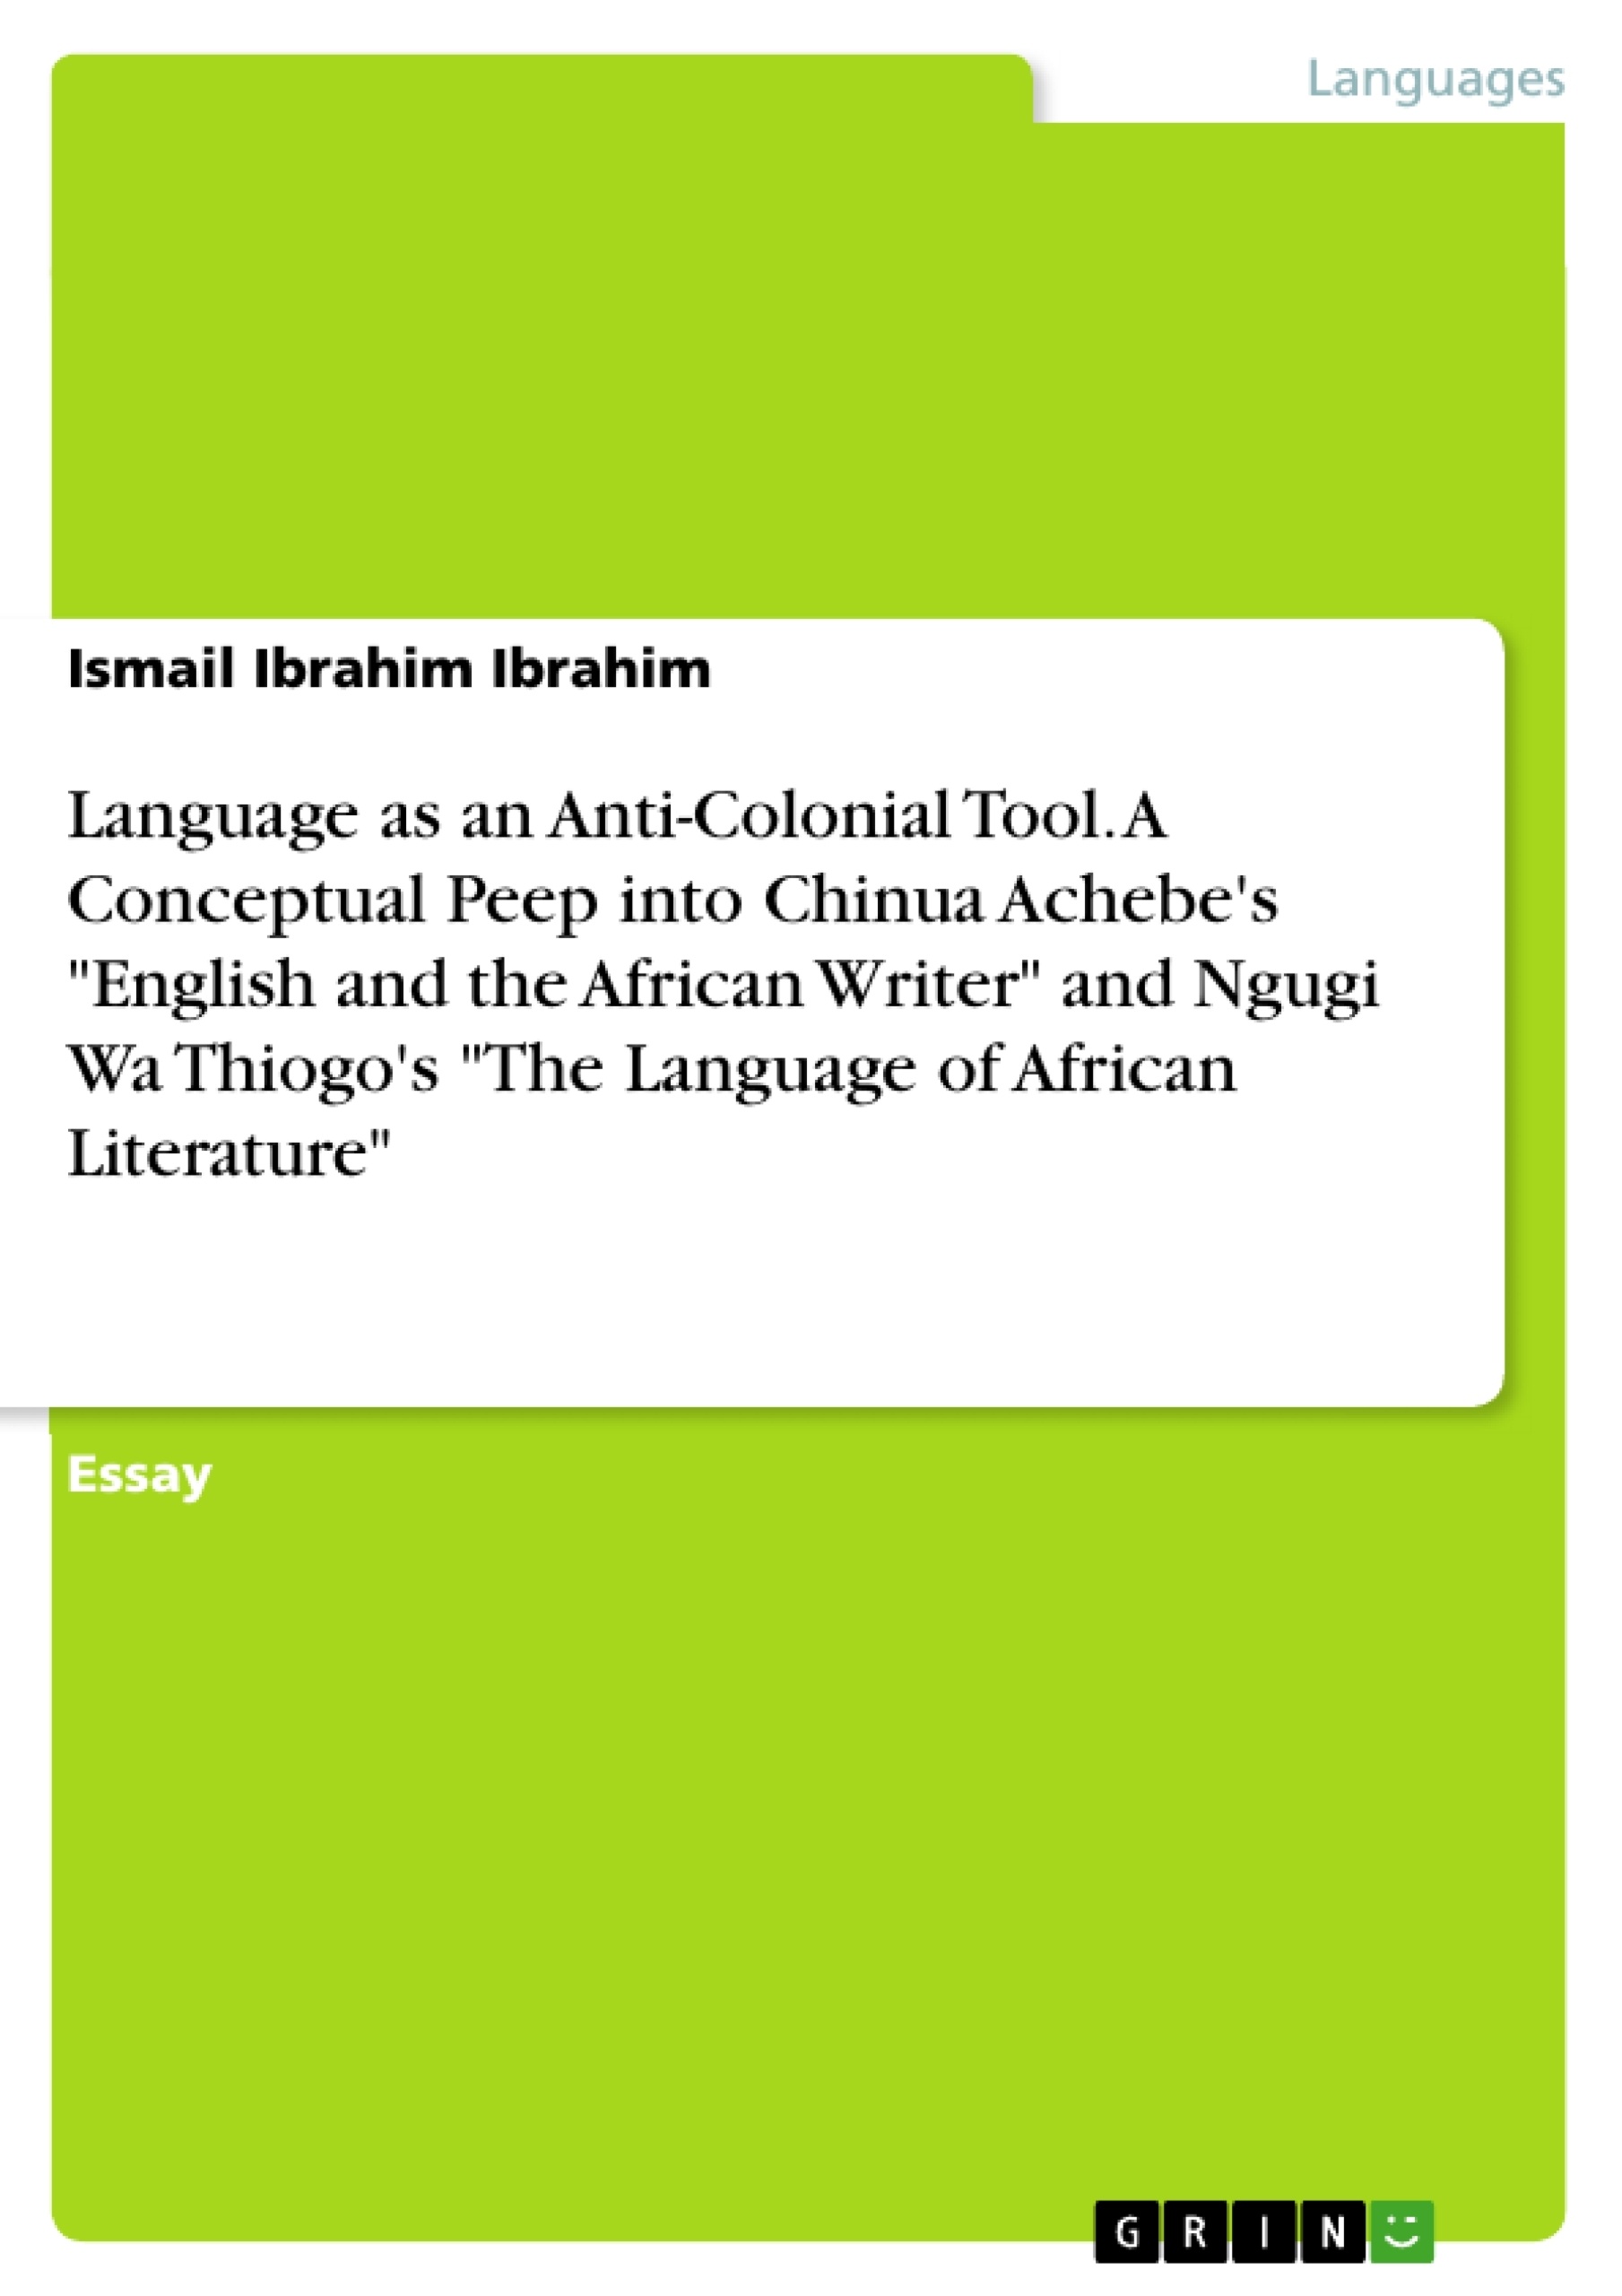 Title: Language as an Anti-Colonial Tool. A Conceptual Peep into Chinua Achebe's "English and the African Writer" and Ngugi Wa Thiogo's "The Language of African Literature"